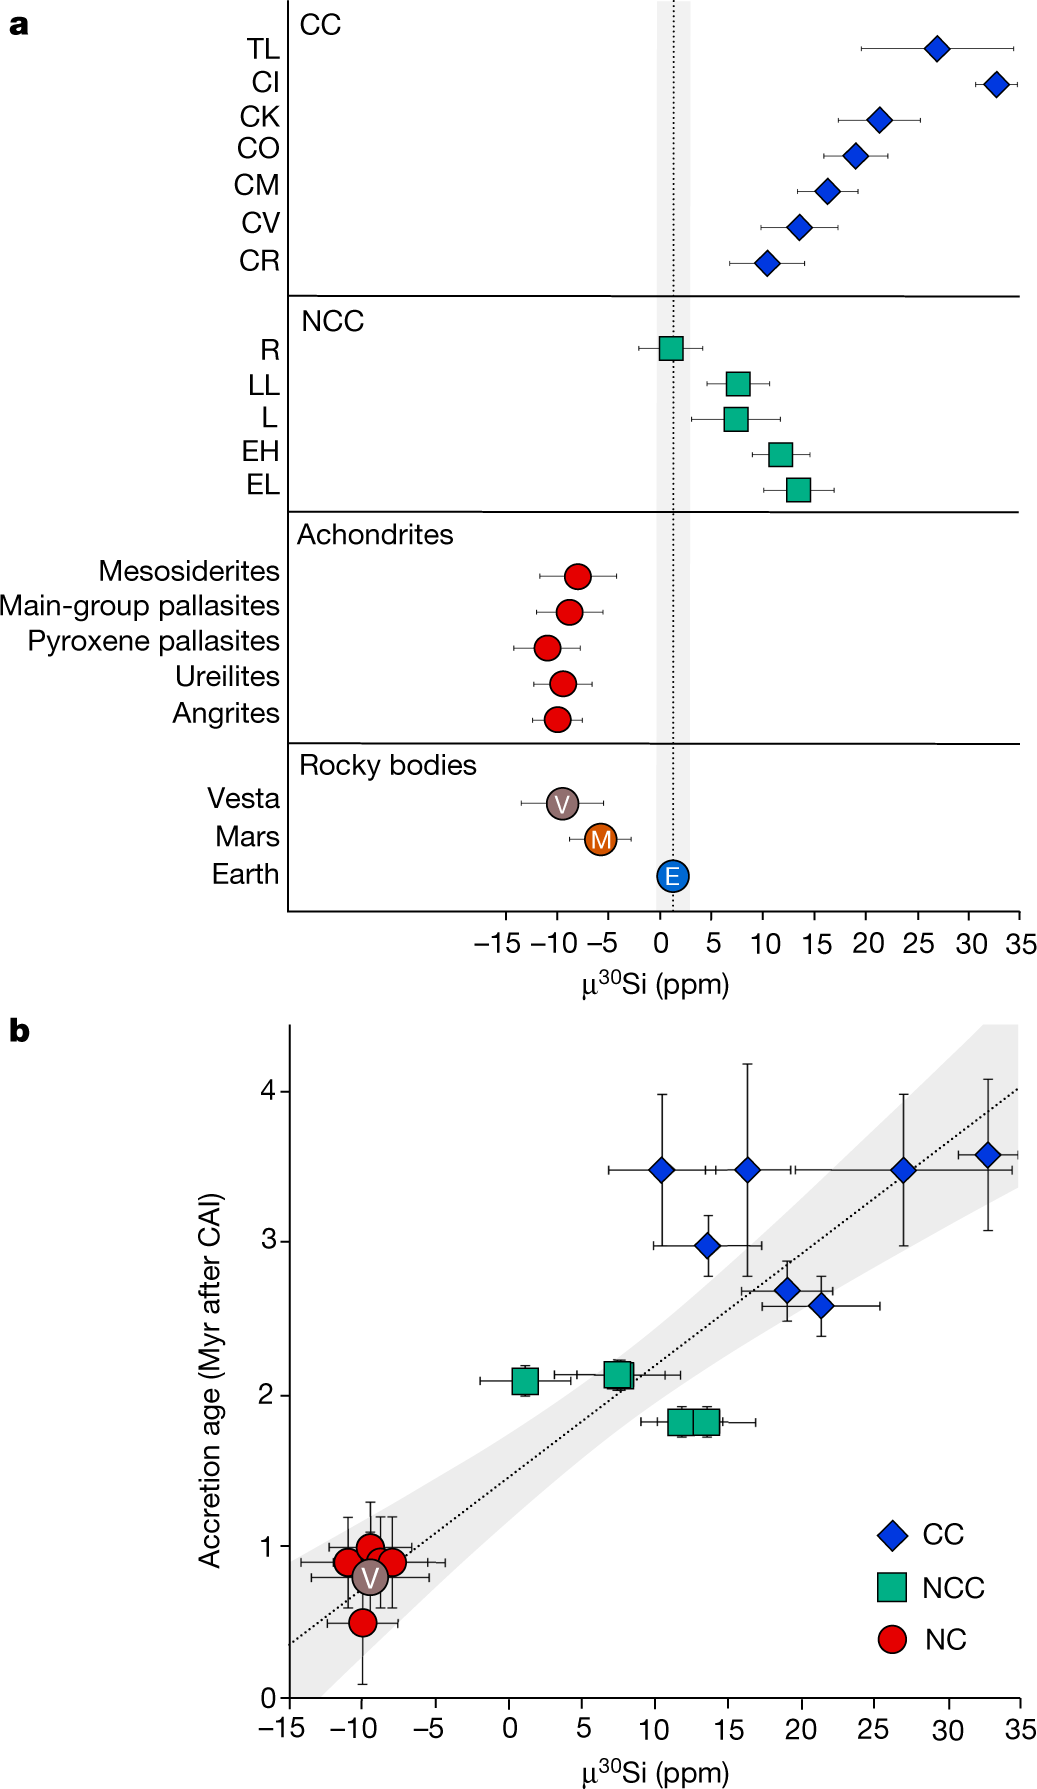 Silicon isotope constraints on terrestrial planet accretion | Nature